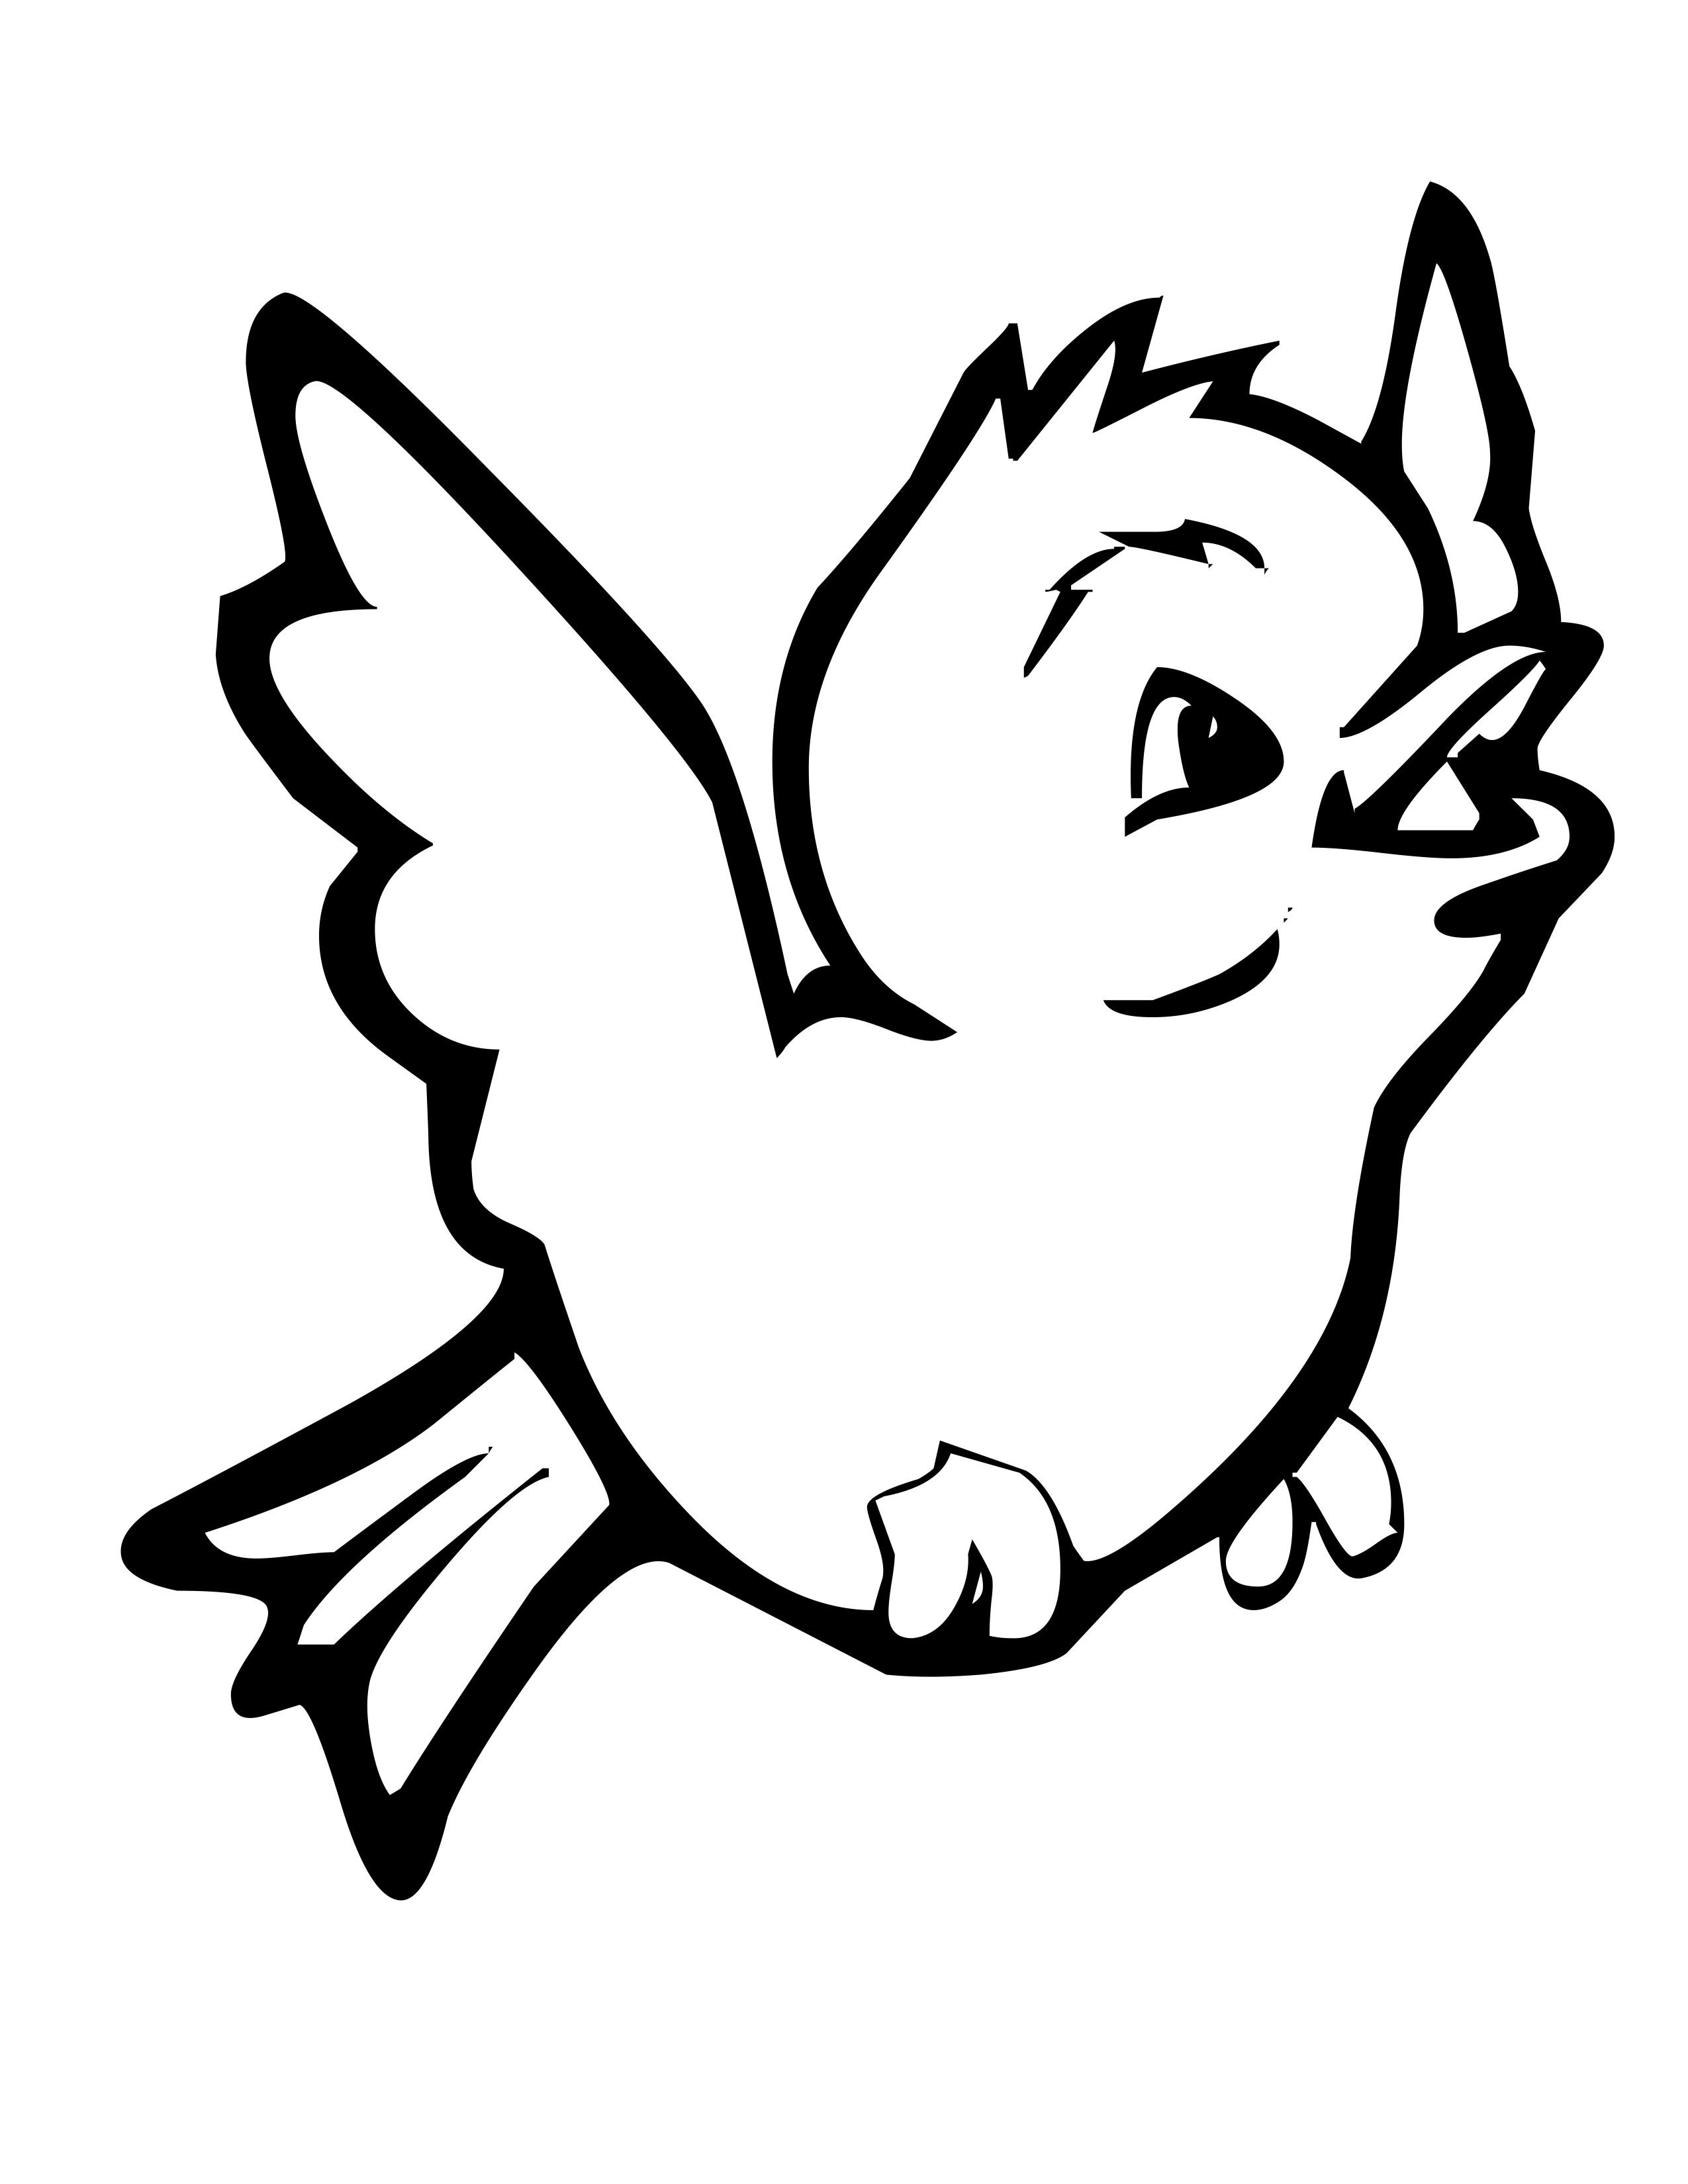 Bird Coloring Pages - Dr. Odd